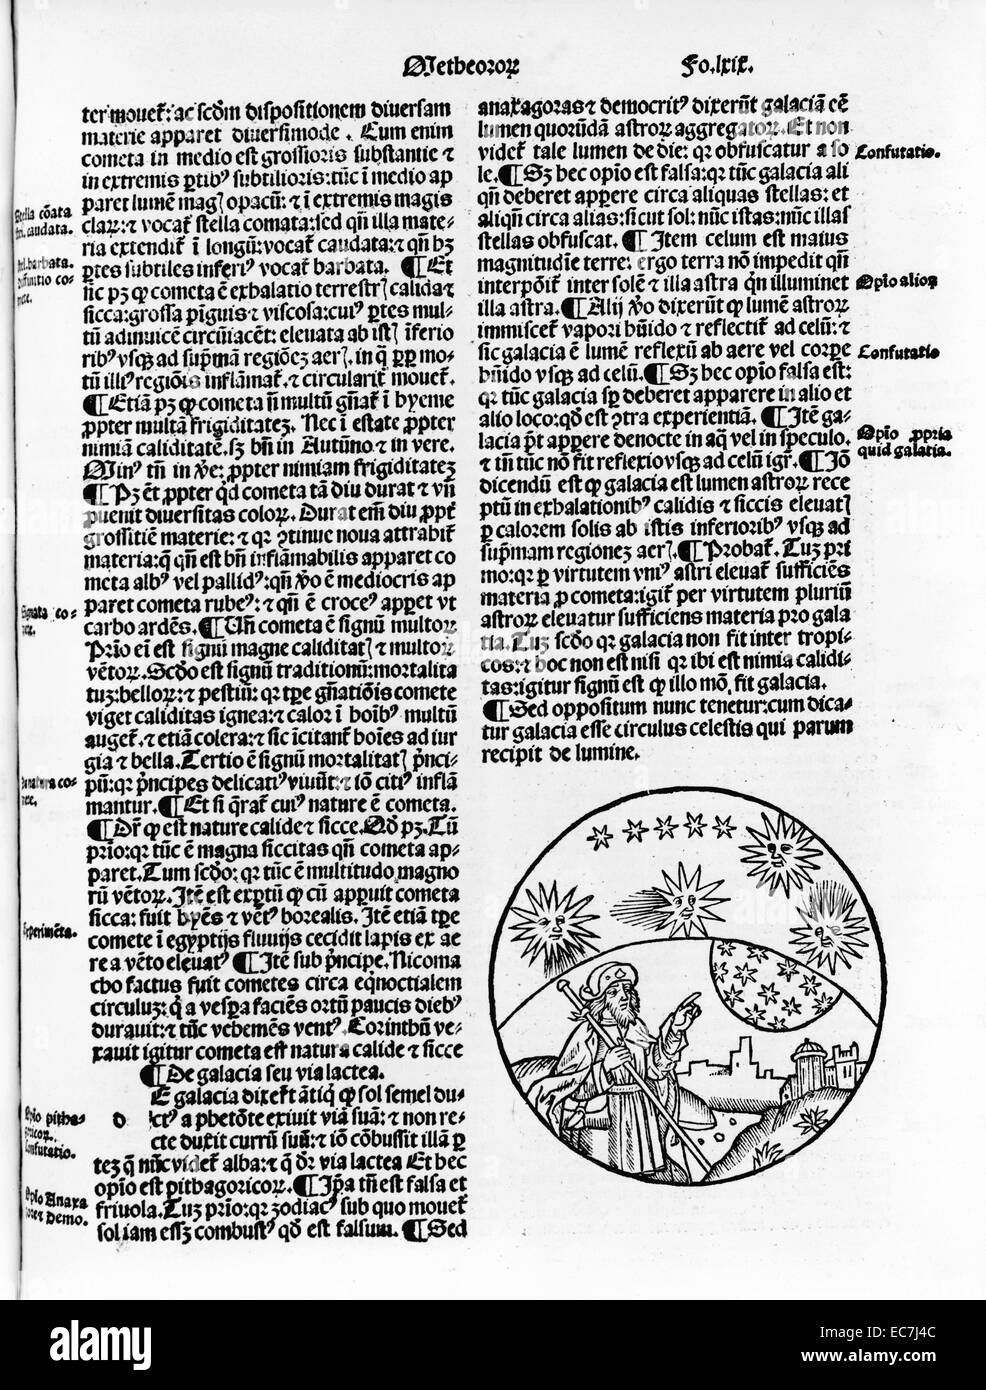 Illustrated page with vignette showing Aristotle pointing to the stars in the sky, 1496 by Thomas Bricot. Aristotle was a Greek philosopher and scientist whose writings constitute the first comprehensive system of Western philosophy. Stock Photo